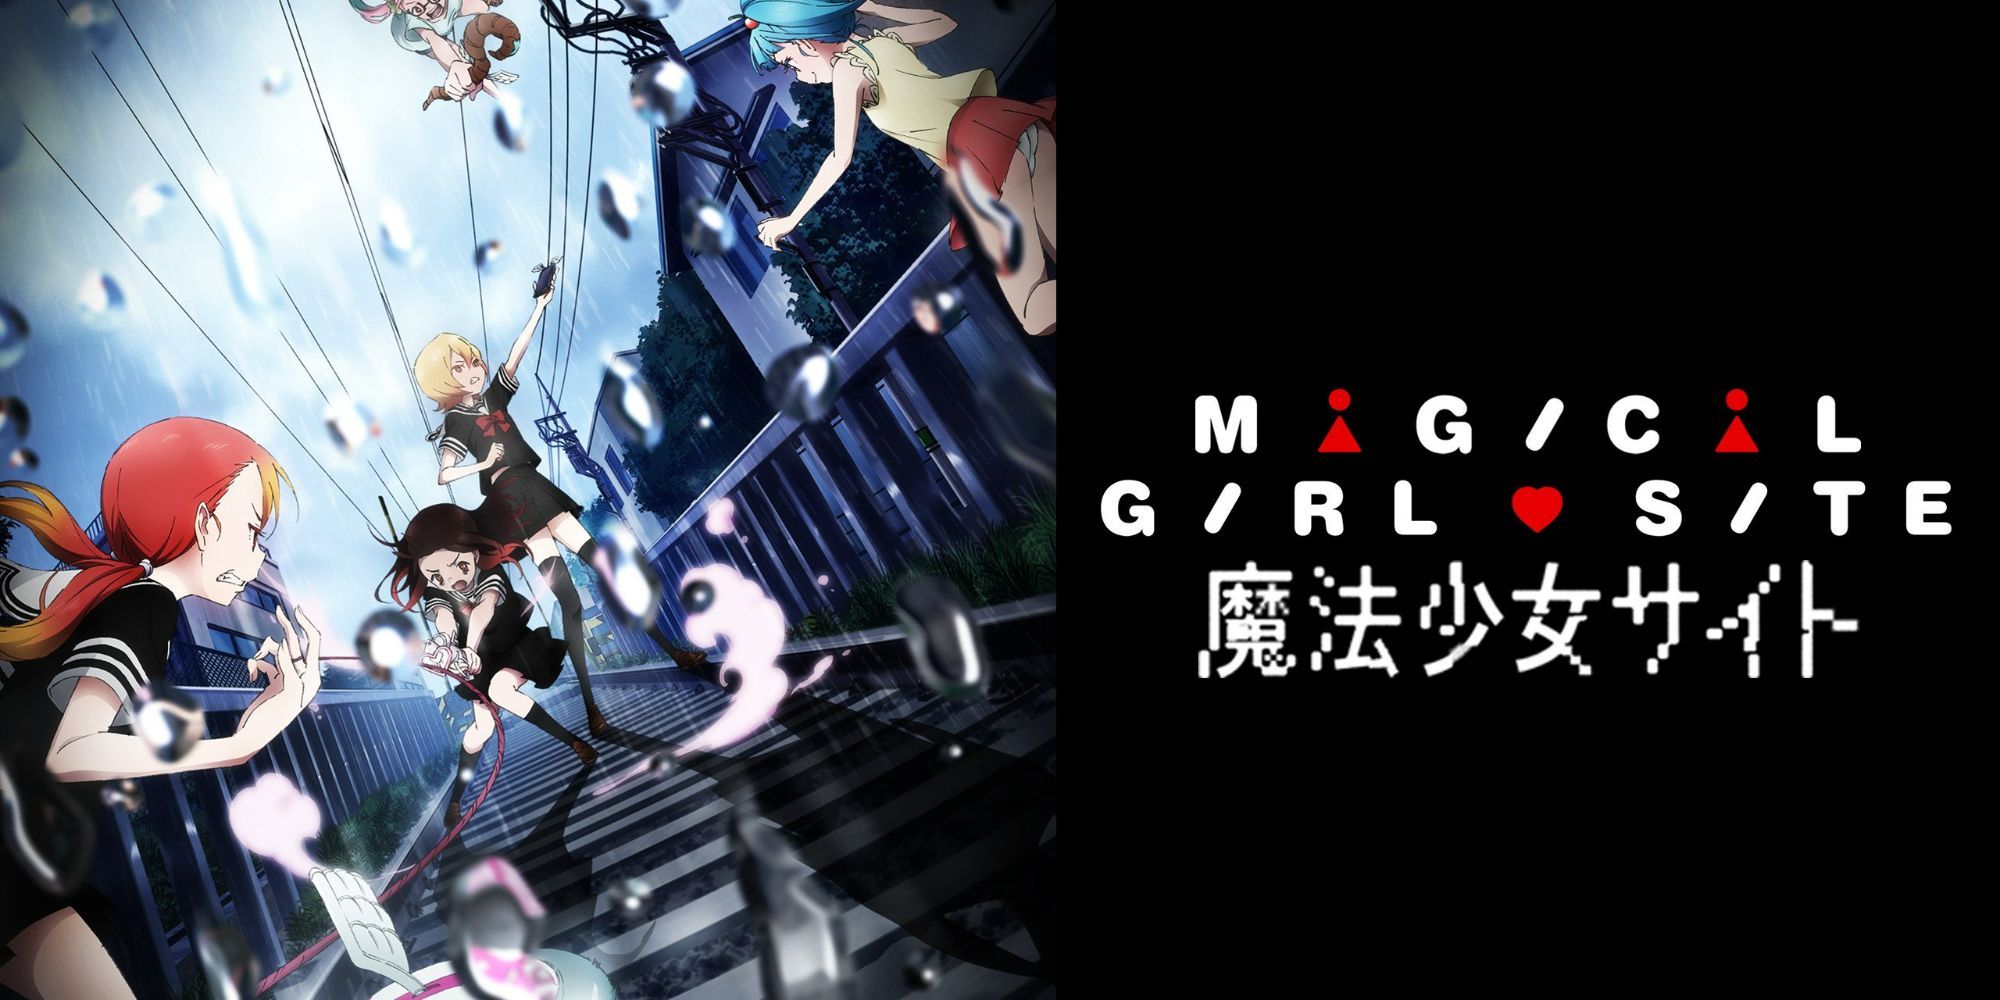 The tile card of Magical Girl Site, featuring the main characters doing battle